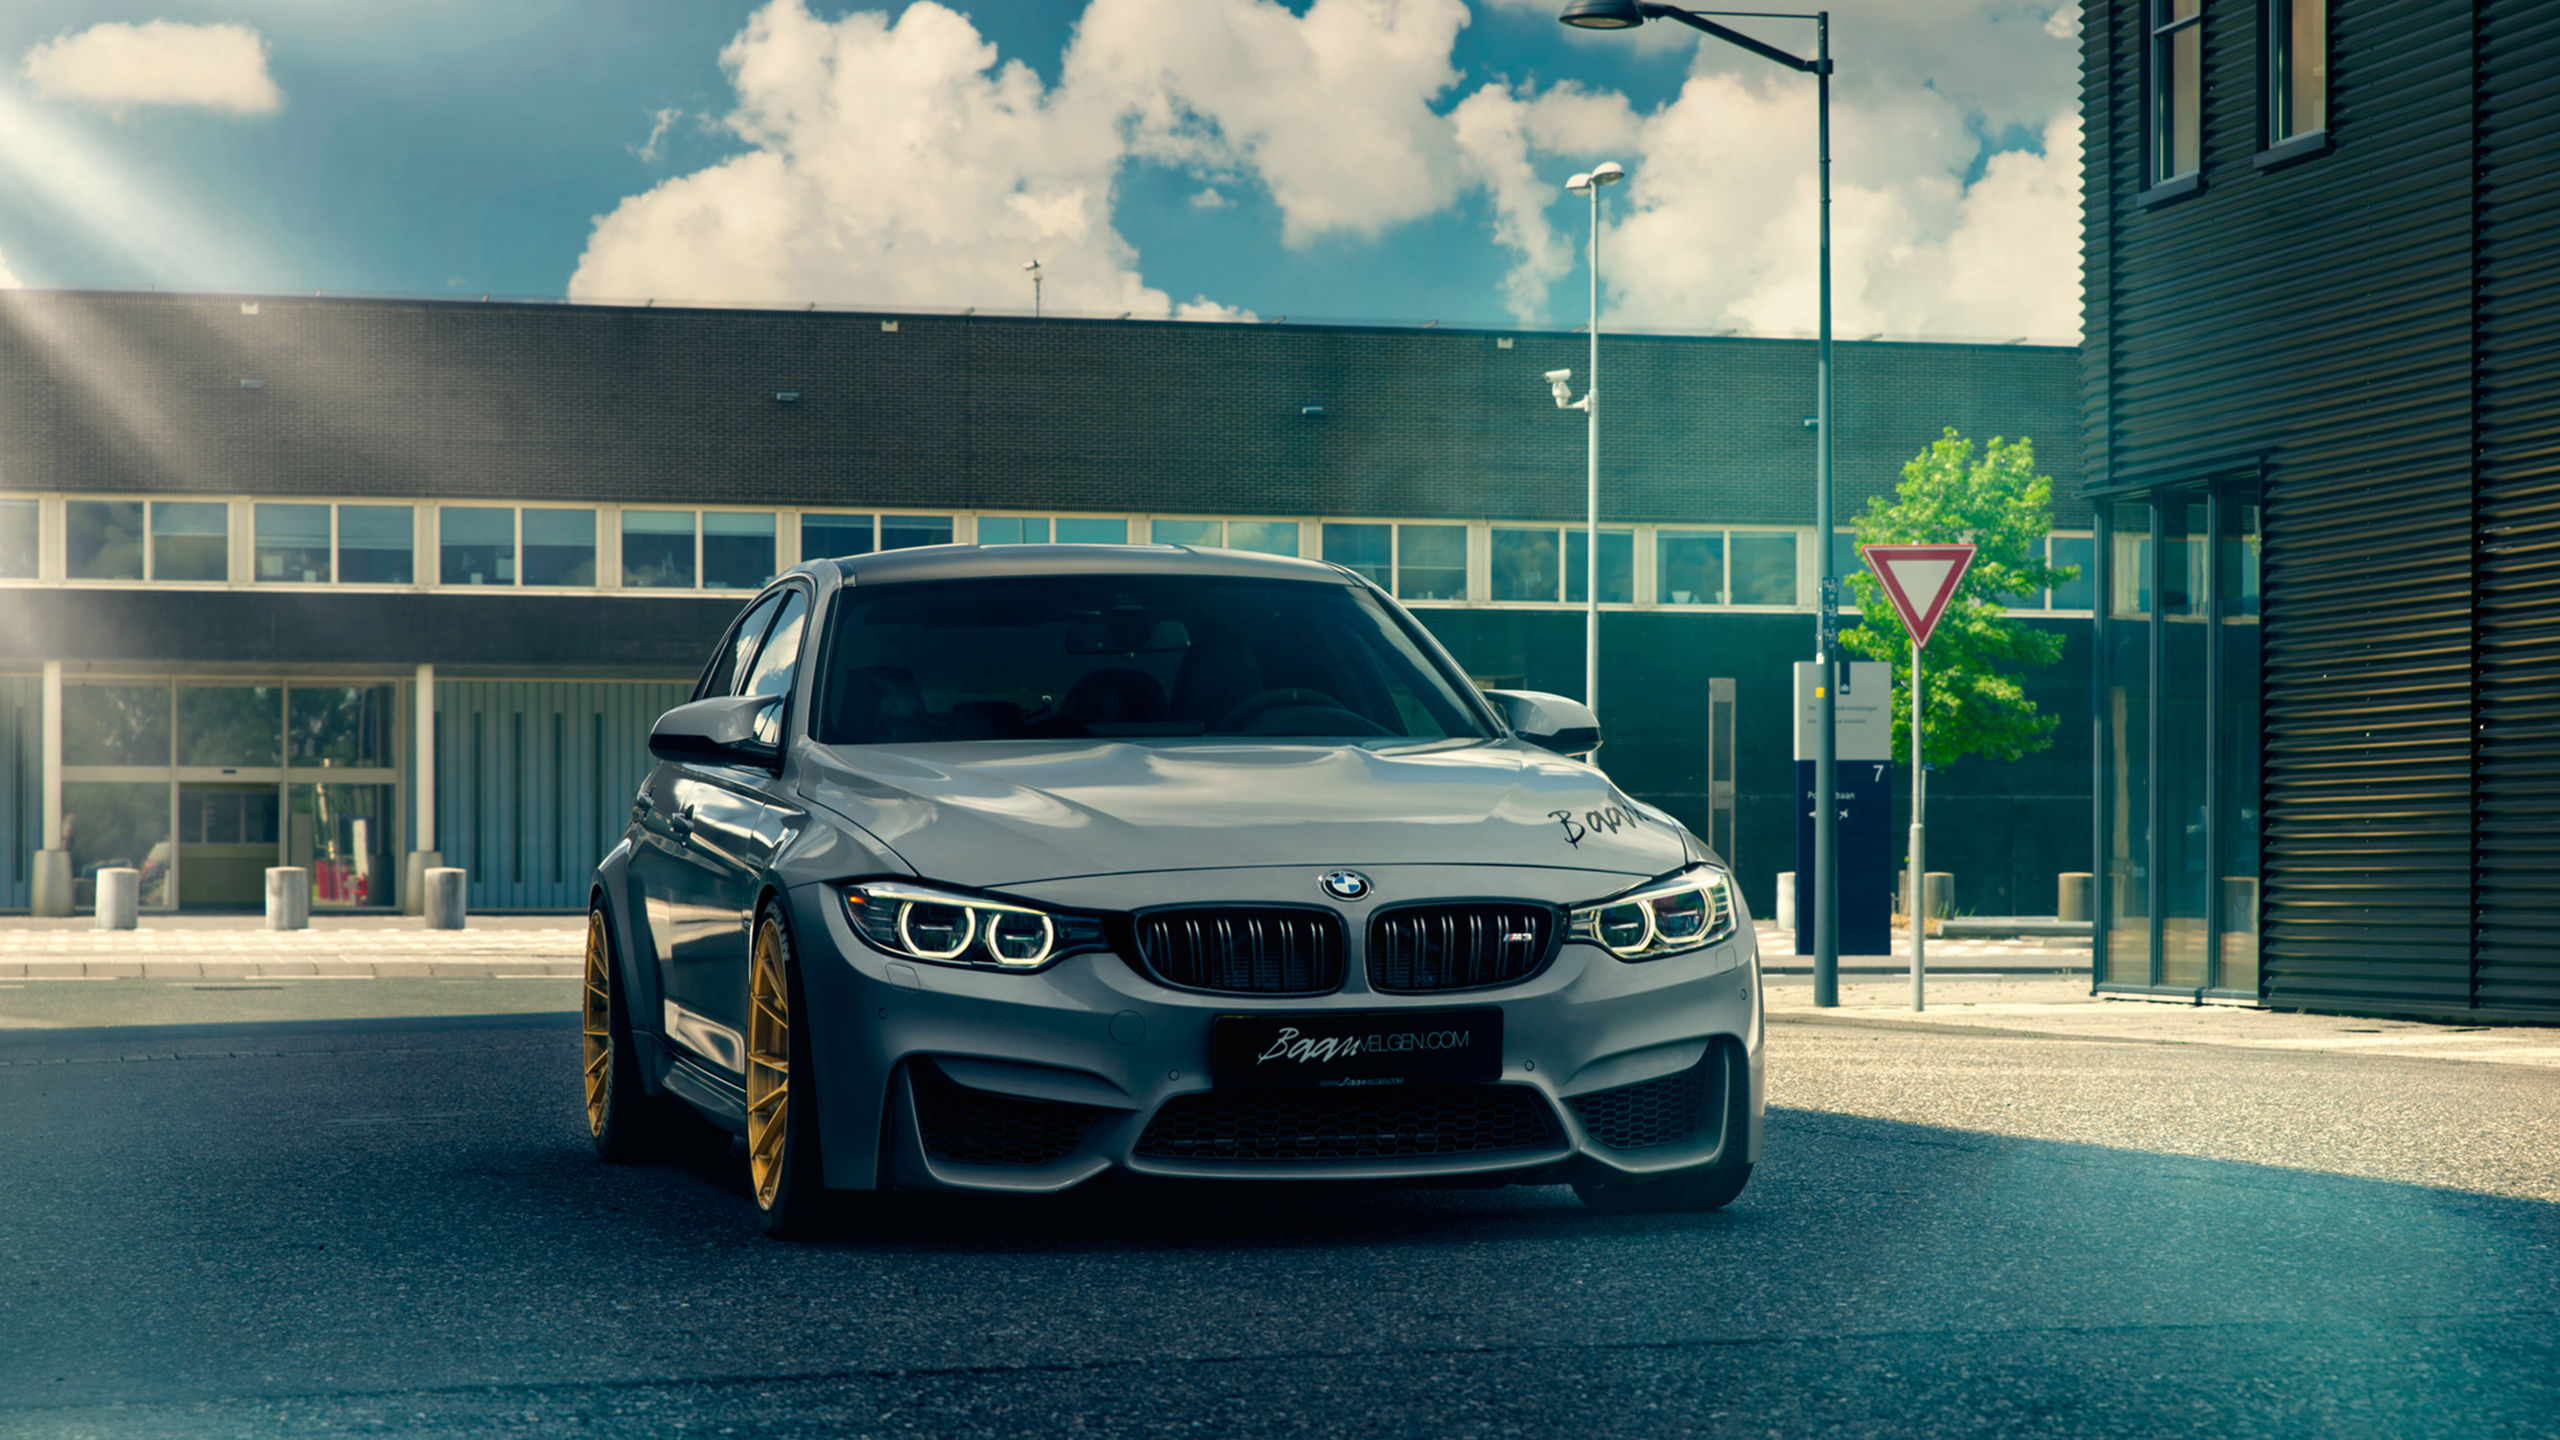 Bmw M3 Black And Orange Racing Car Wallpaper Background Bmw Car Pictures  Background Image And Wallpaper for Free Download